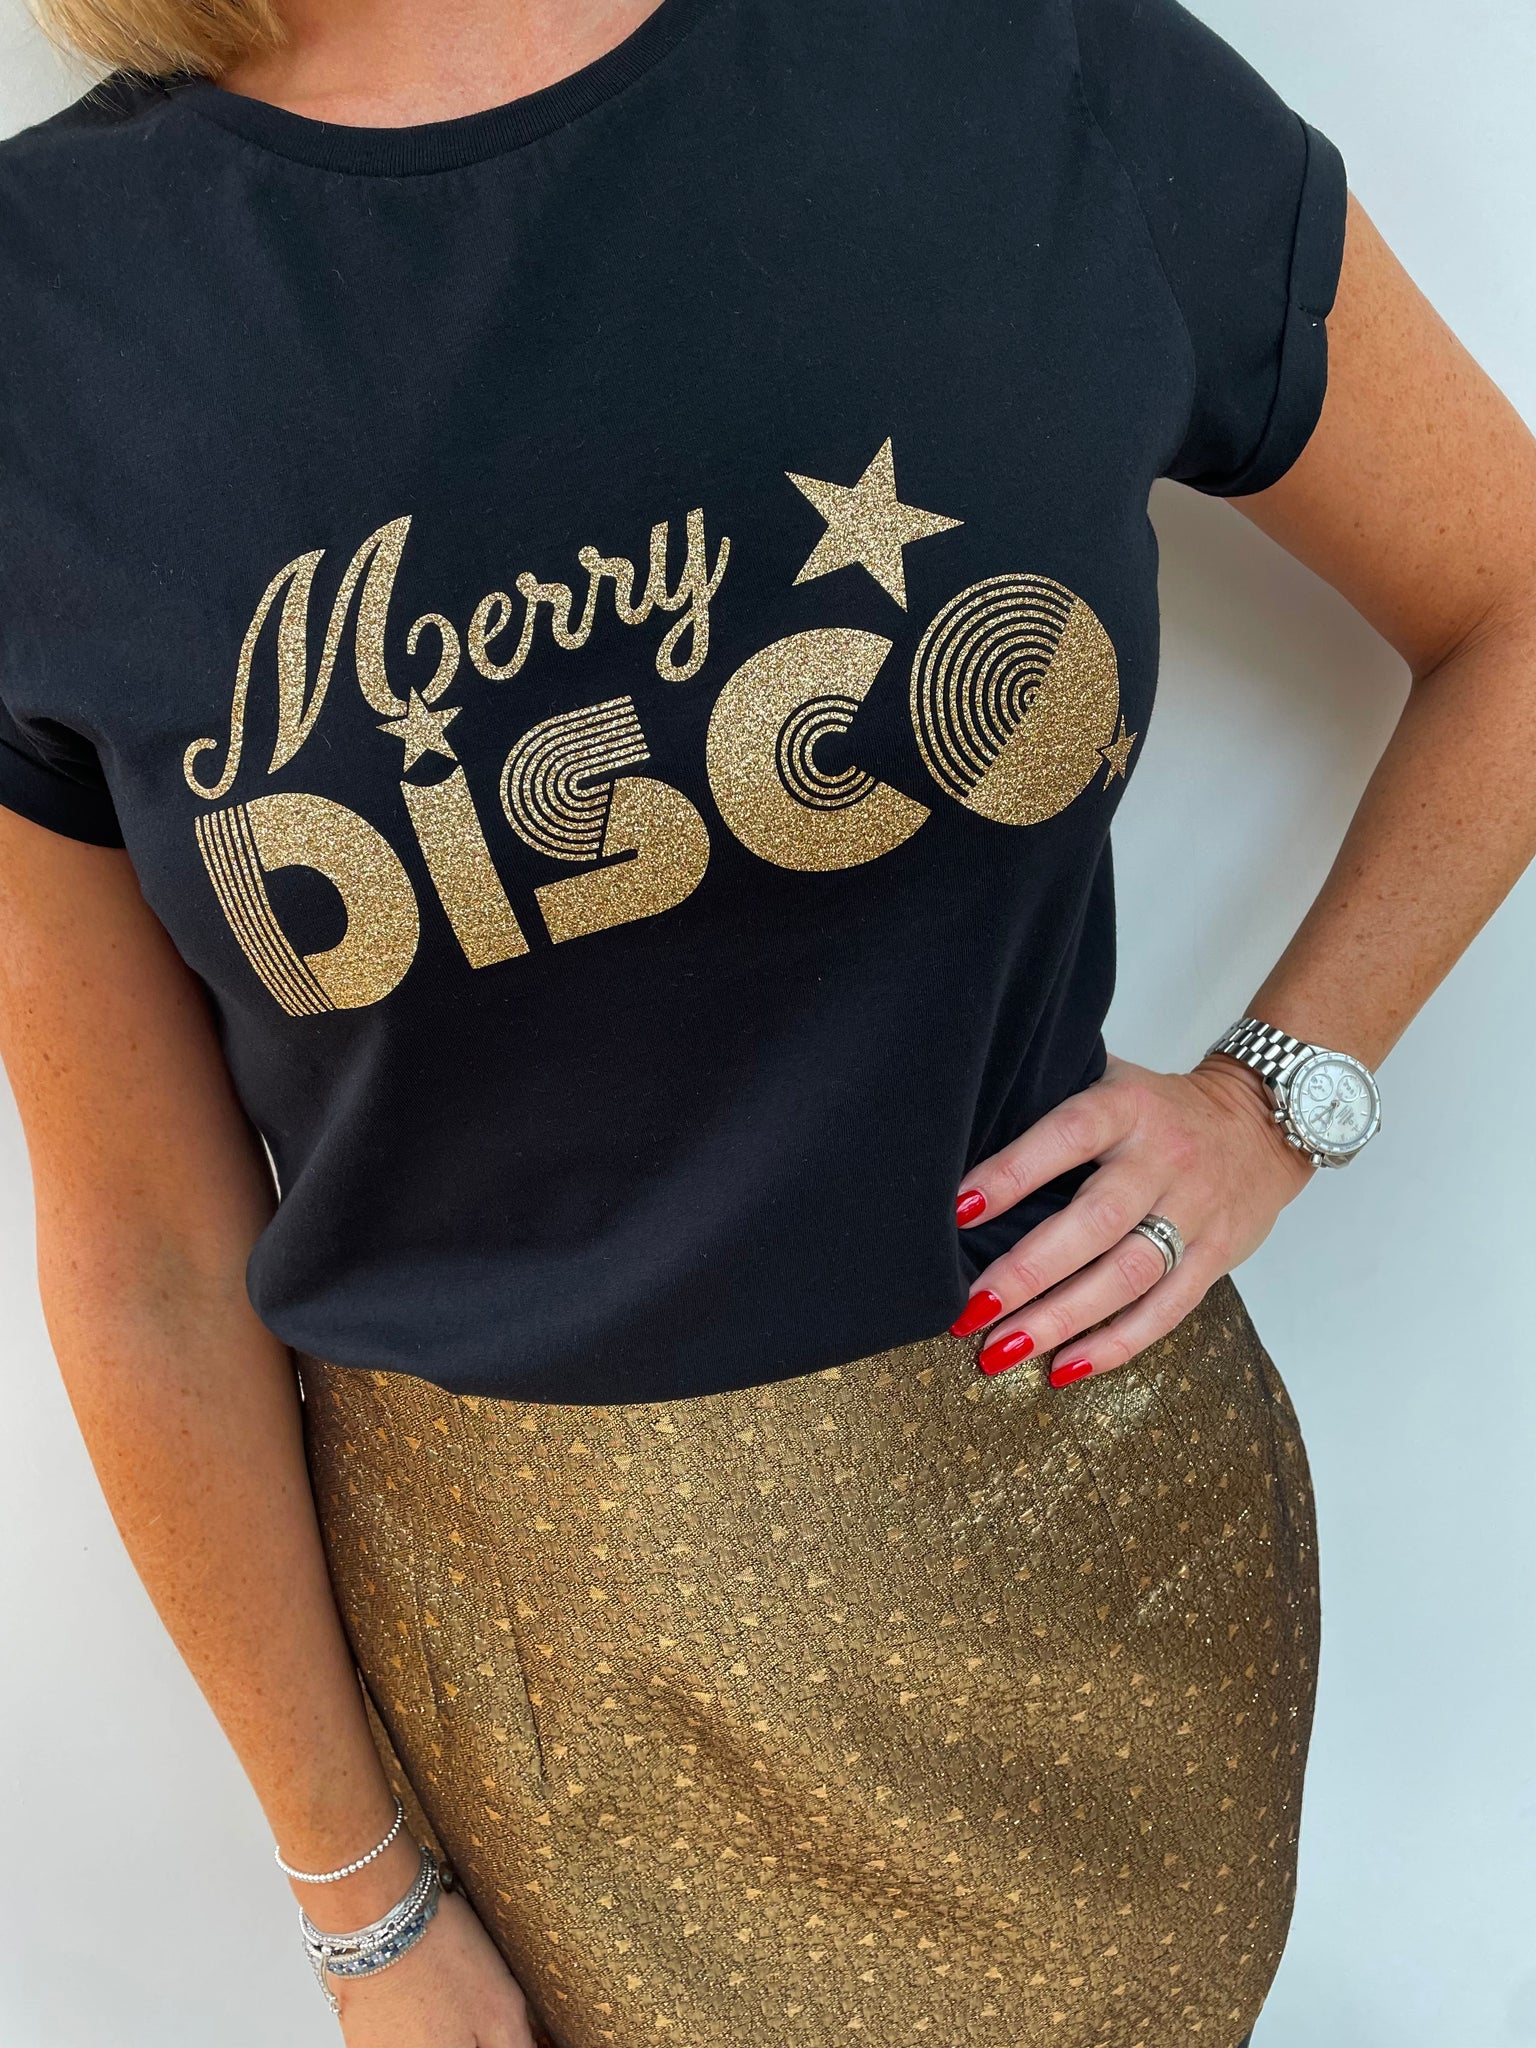 The Black and Sparkly Gold Christmas T-Shirt